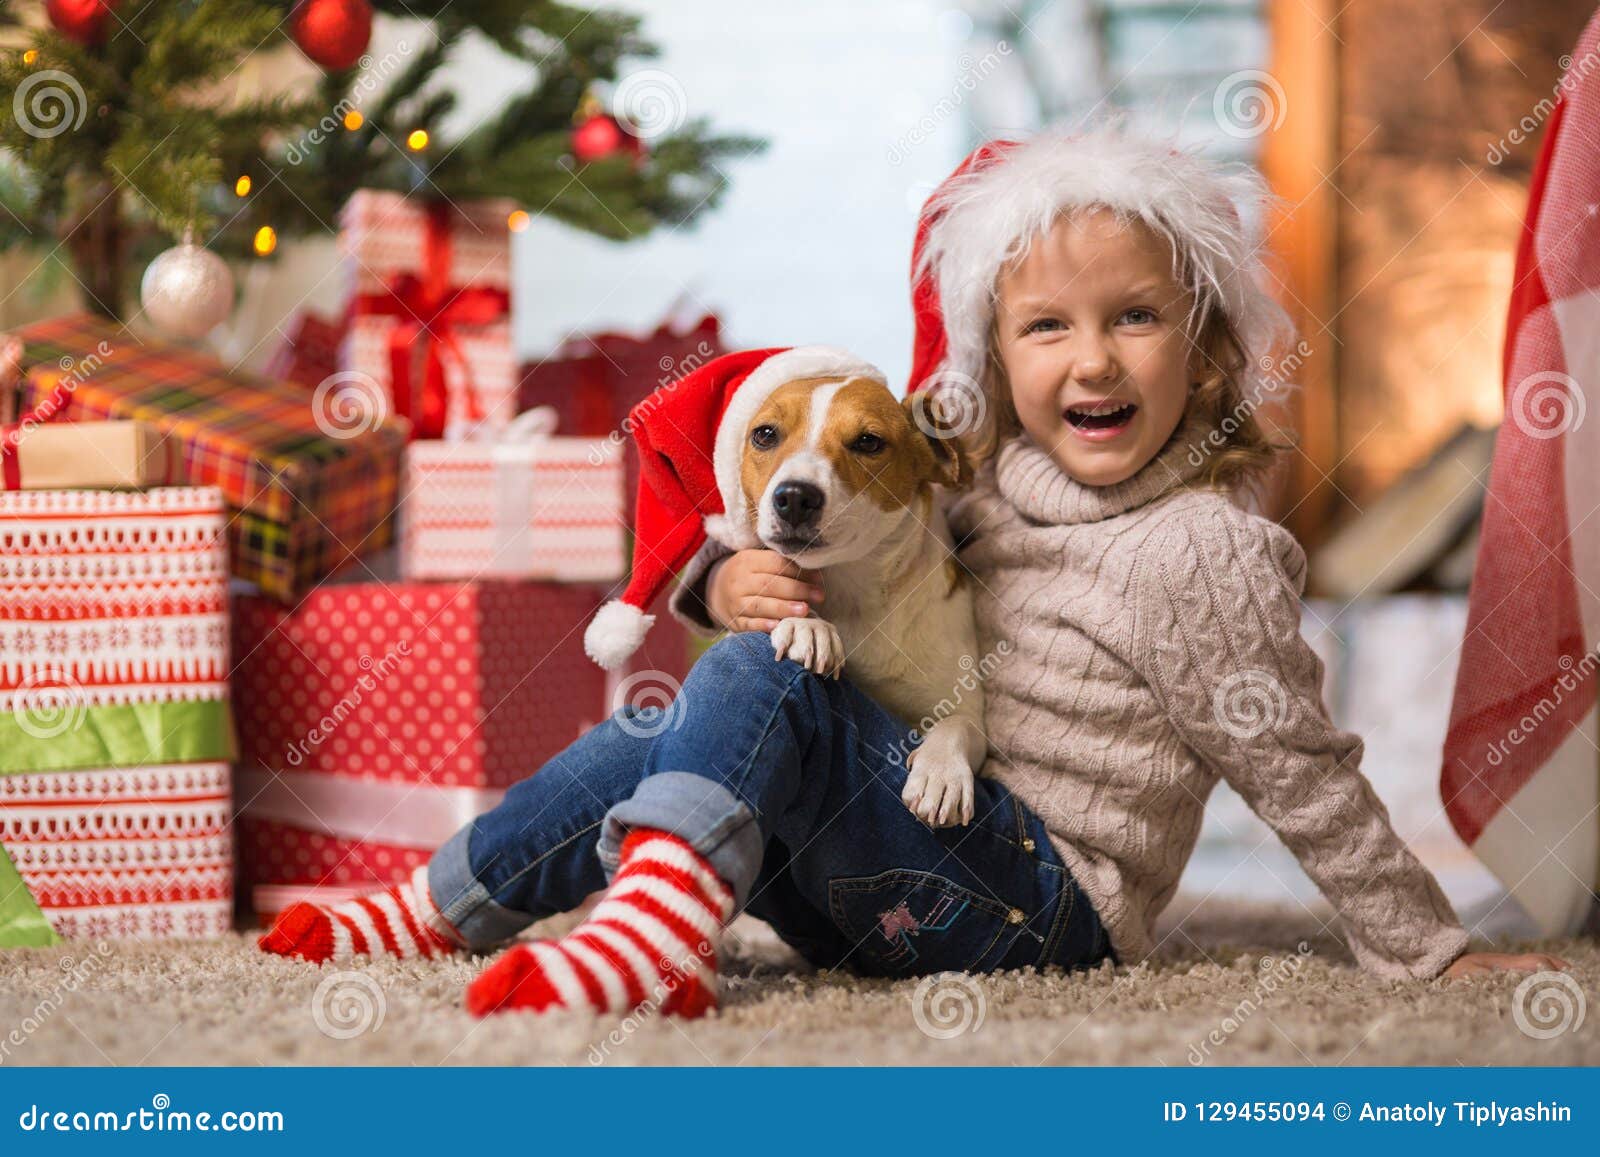 Girl Child Celebrating a Happy Christmas at Home by the Fireplace with ...